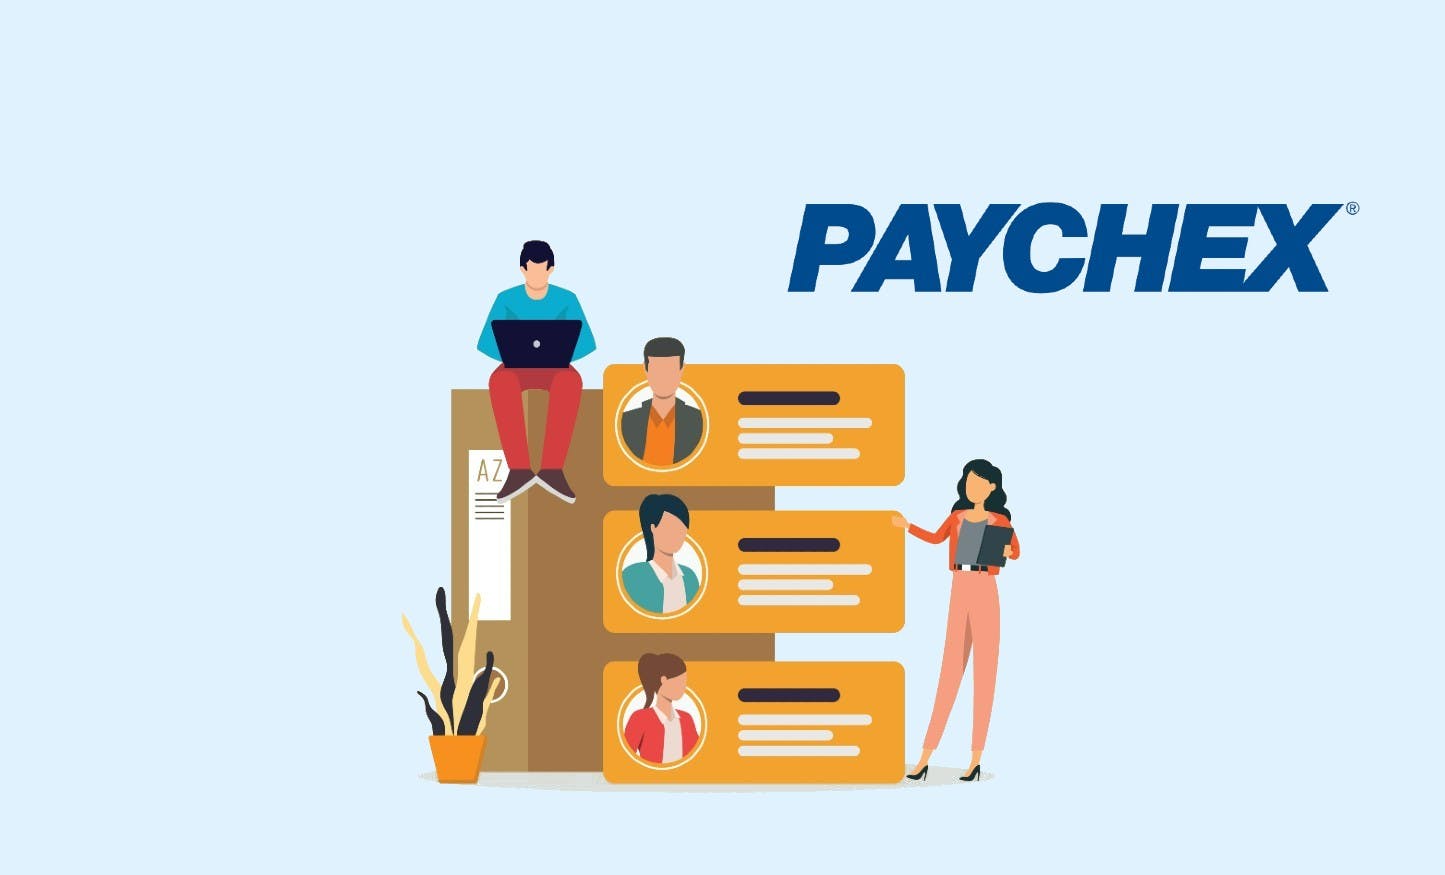 Paychex PEO Services Review: Features, Cost & More